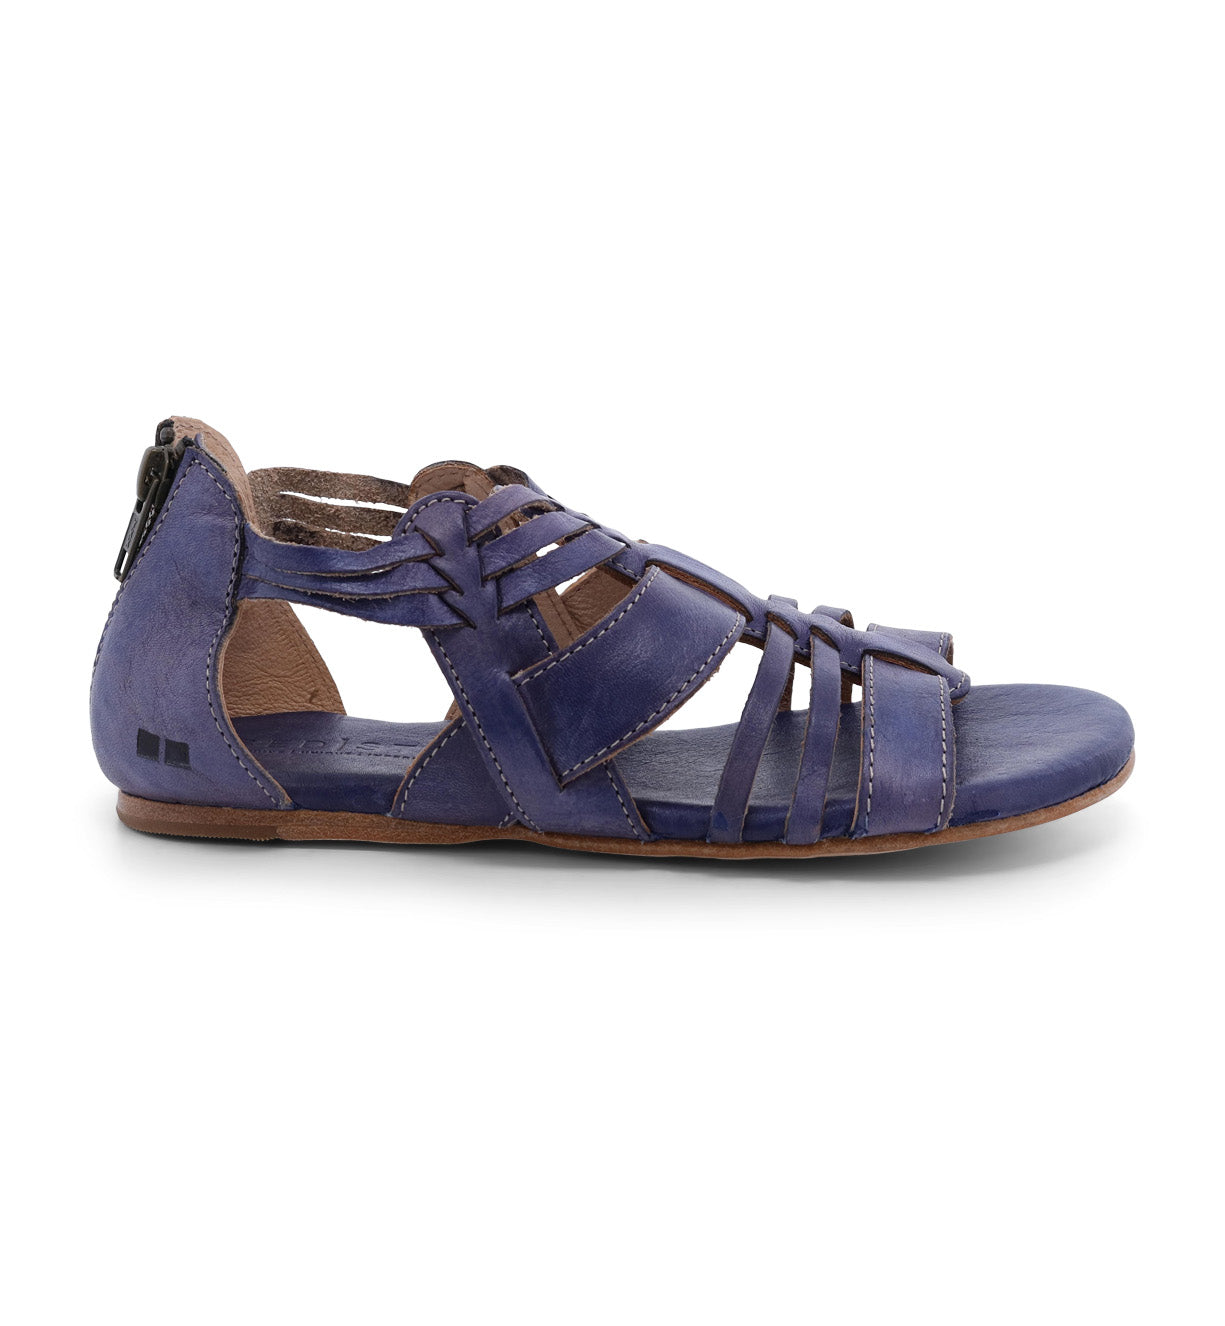 A women's blue Cara sandal with straps and buckles by Bed Stu.